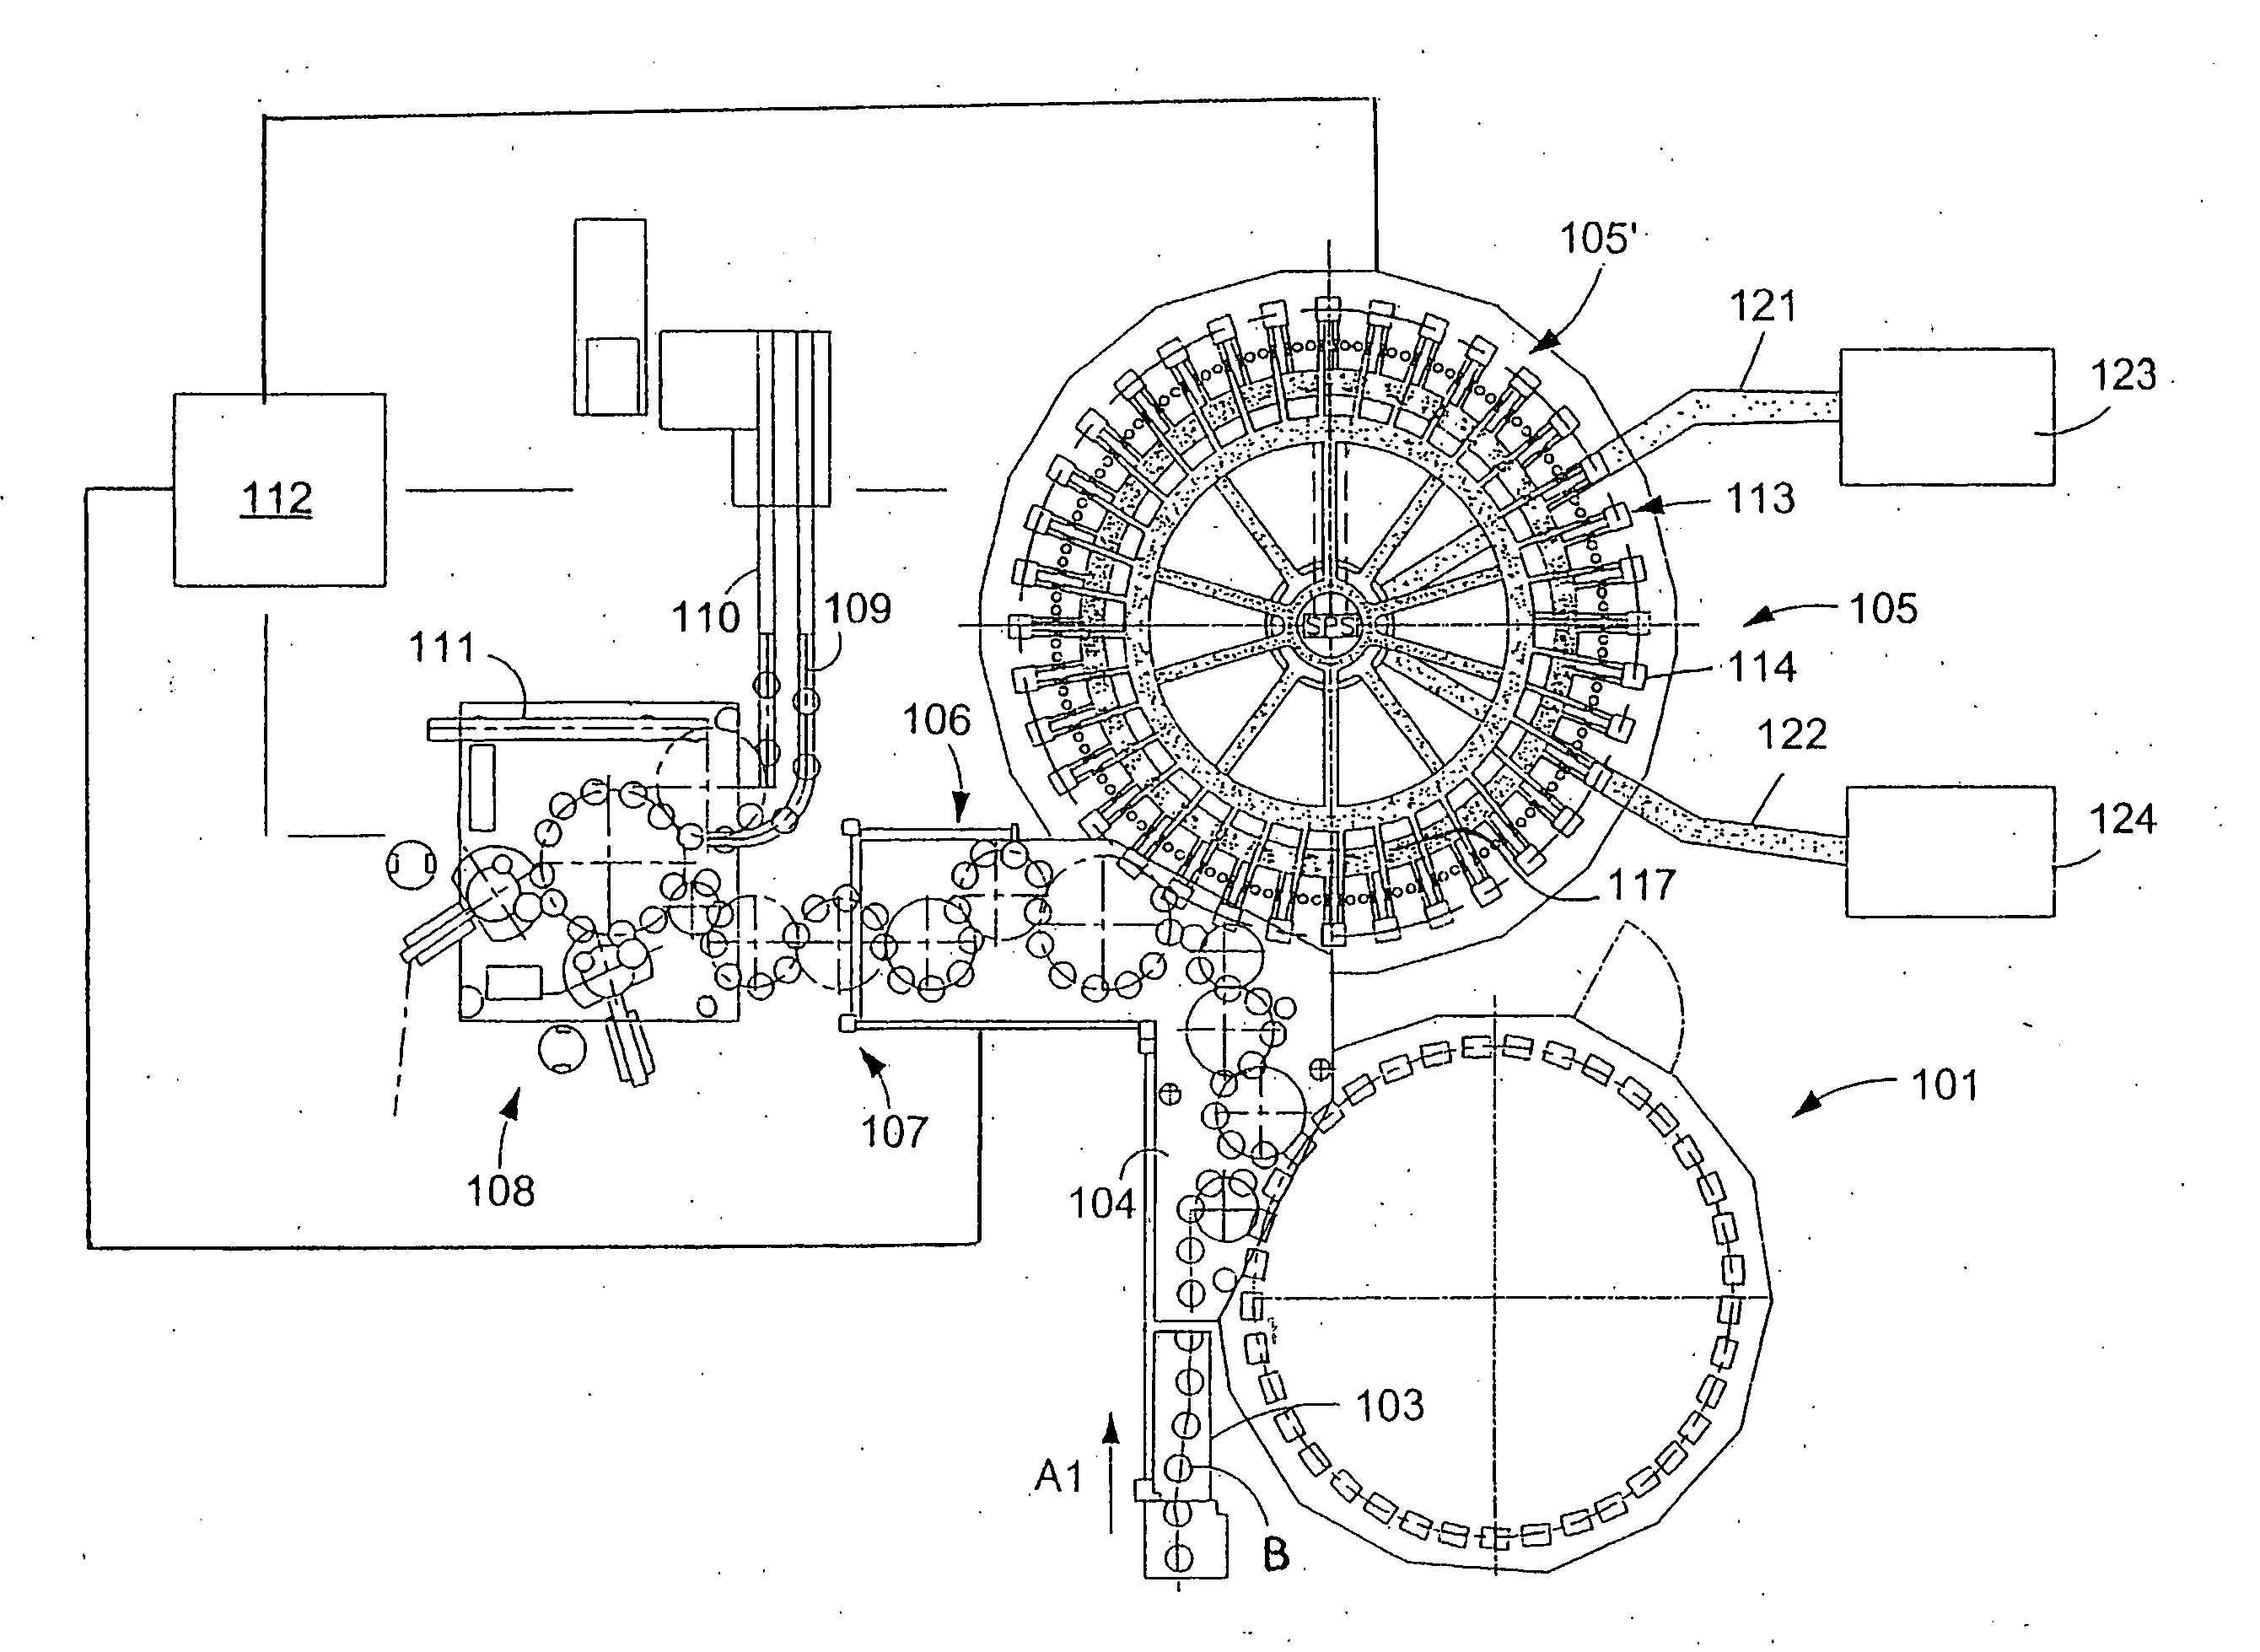 Method of operating a beverage bottling plant with a beverage filling machine for filling beverage bottles, and a method and apparatus for monitoring beverage bottle or container handing machines in the beverage bottling plant